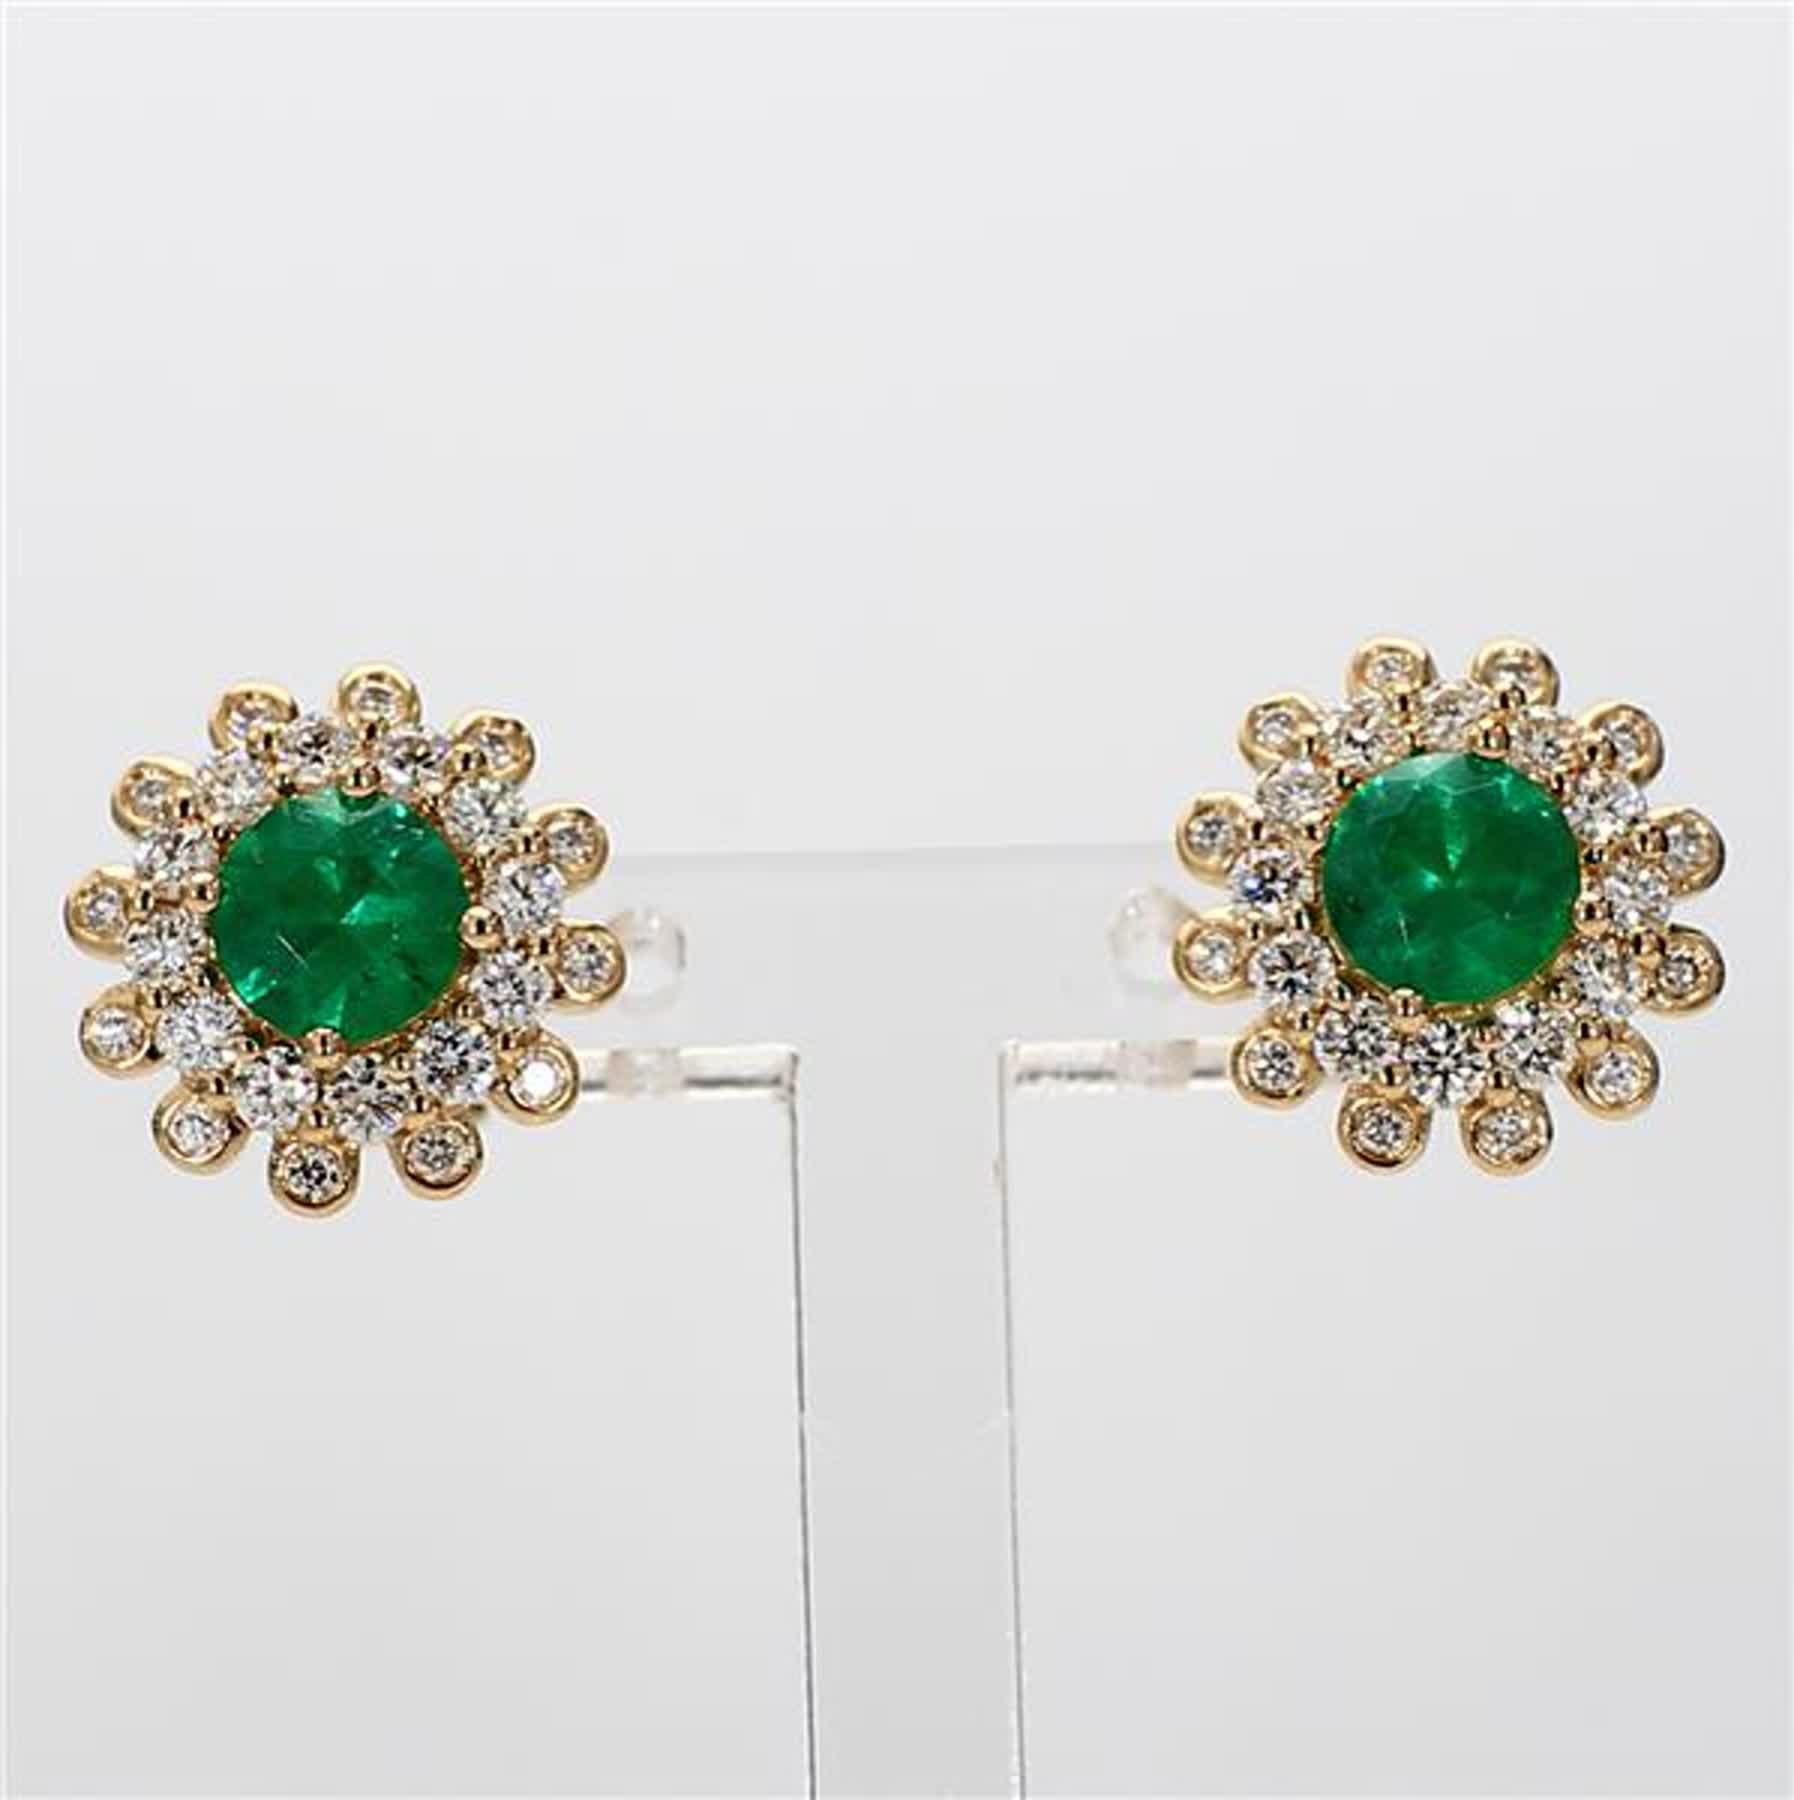 RareGemWorld's classic emerald earrings. Mounted in a beautiful 14K Yellow Gold setting with natural round cut green emerald's. The emerald's are surrounded by natural round white diamond melee. These earrings are guaranteed to impress and enhance